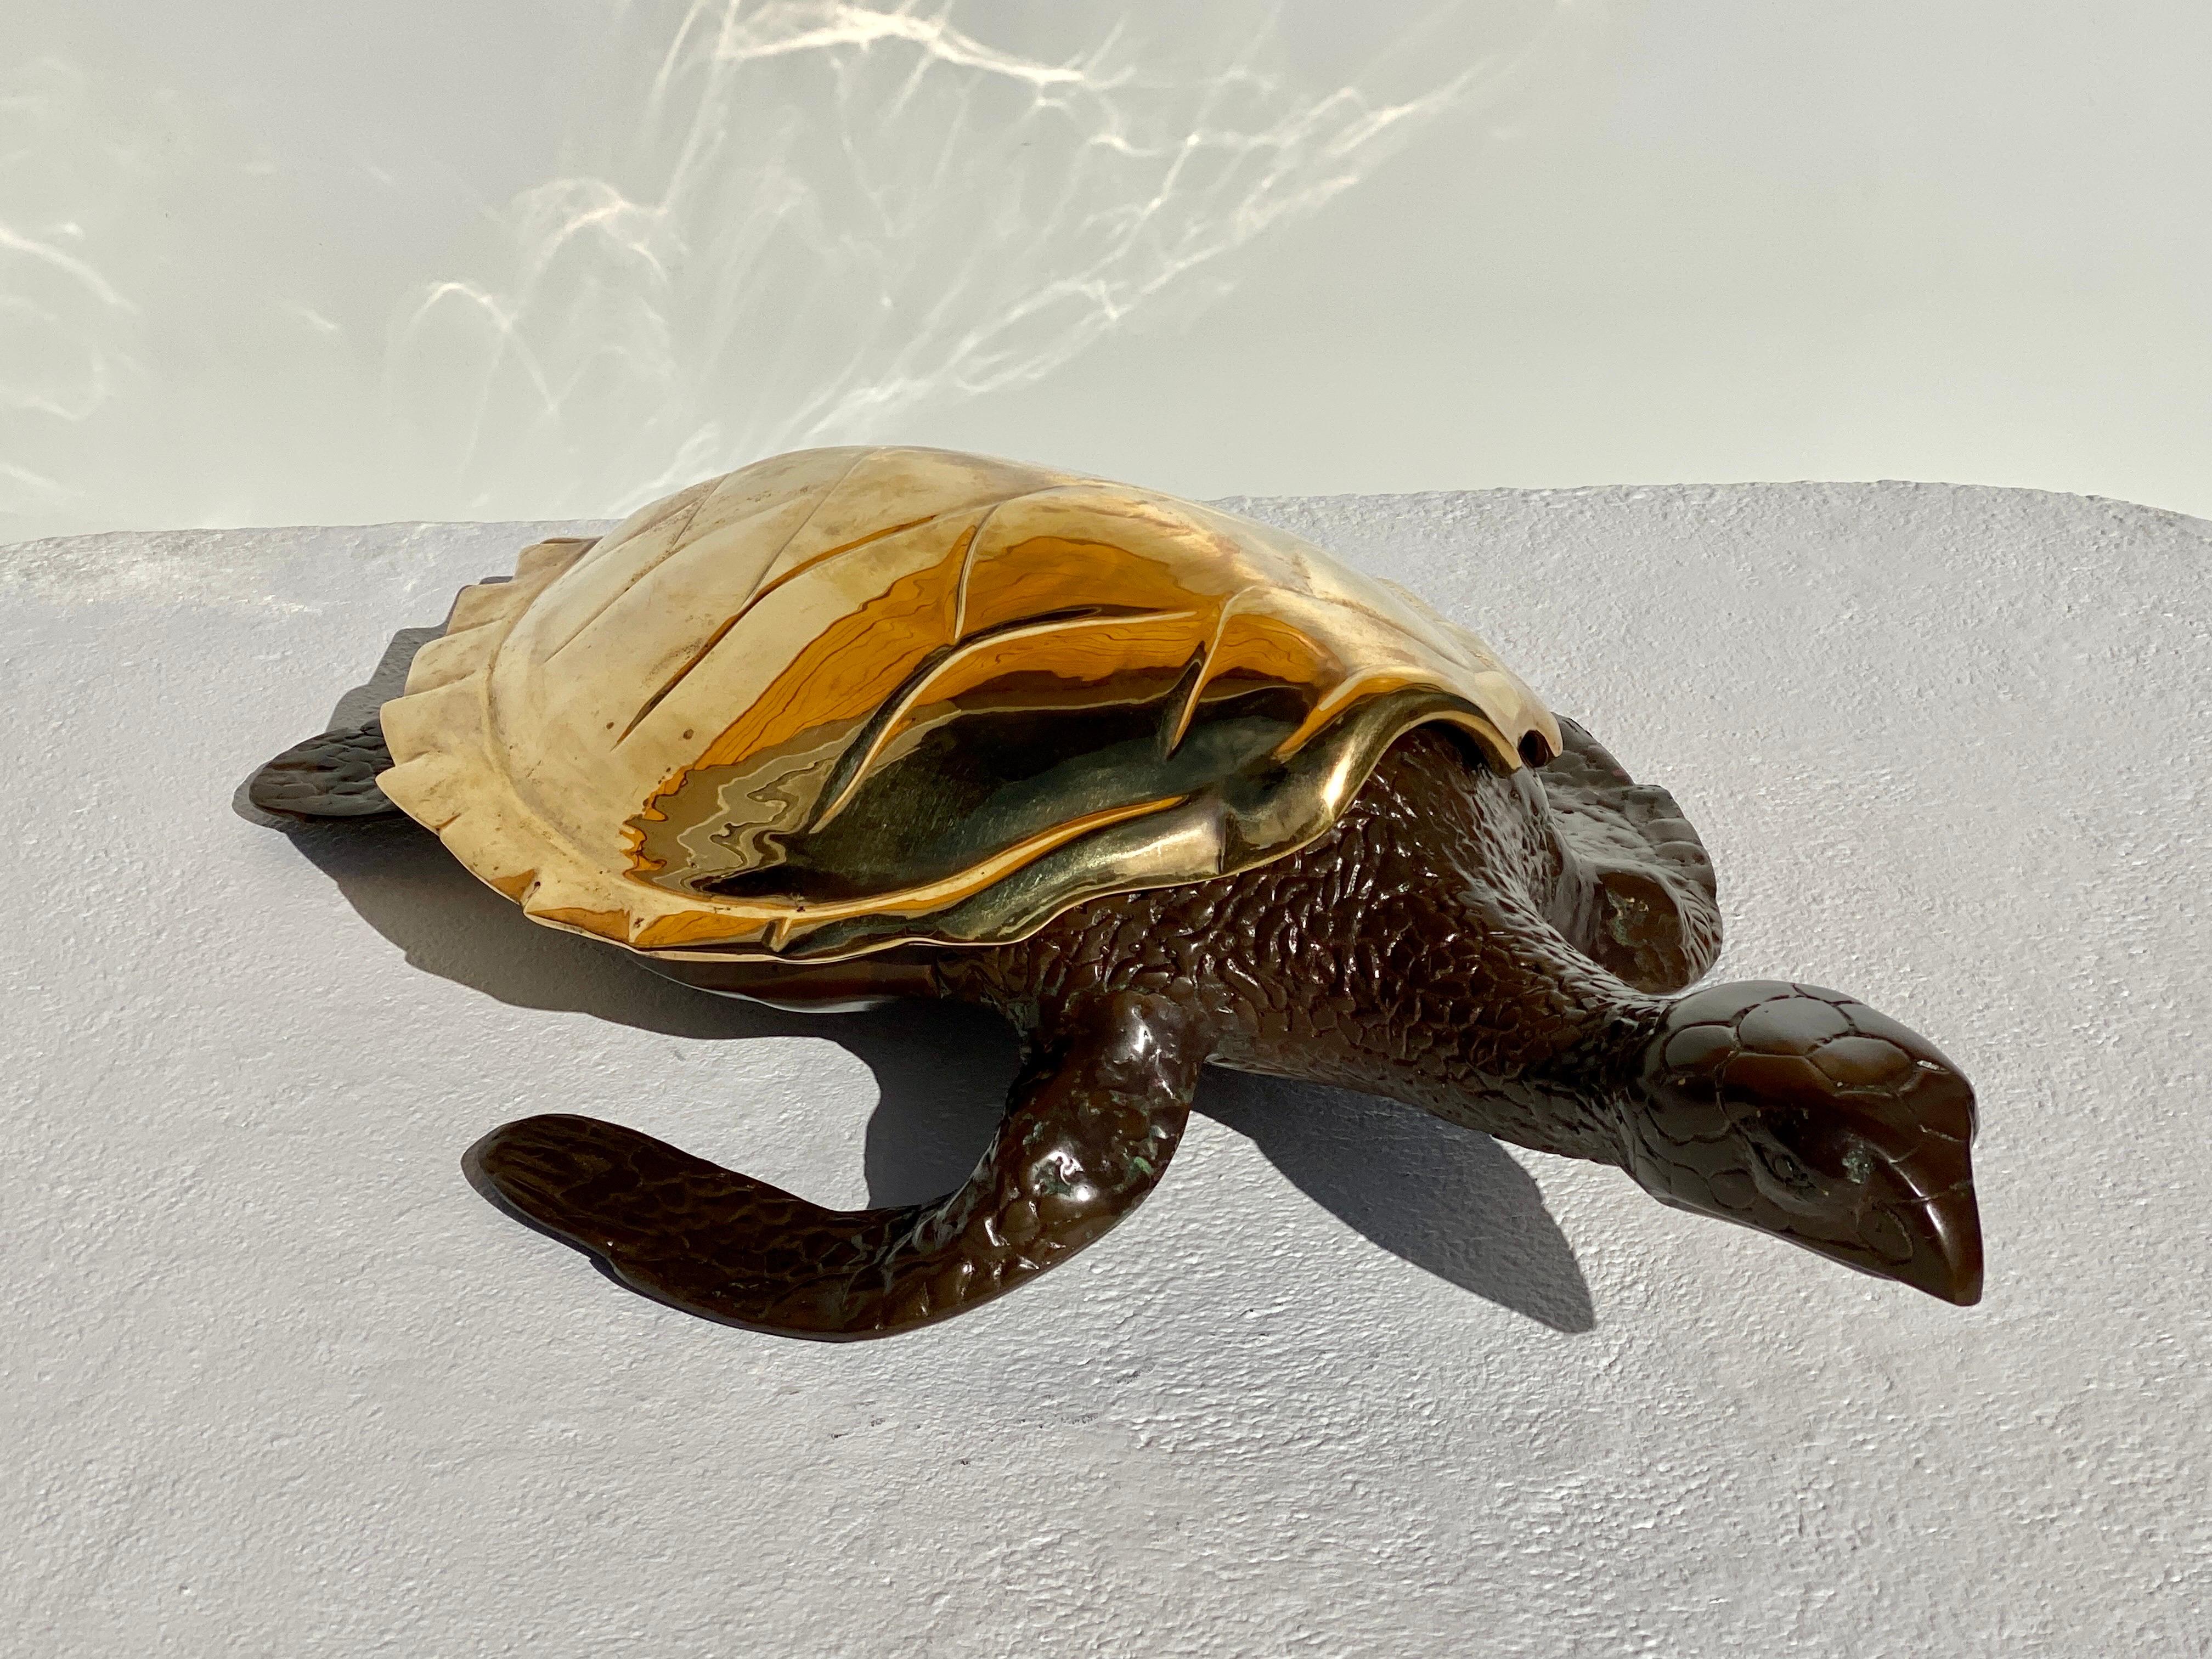 Large brass sea turtle sculpture / decorative box / catch all.
Shell is polished brass and rest of body is in patinated finish.
We also have a smaller size in our other listing LU985031284932